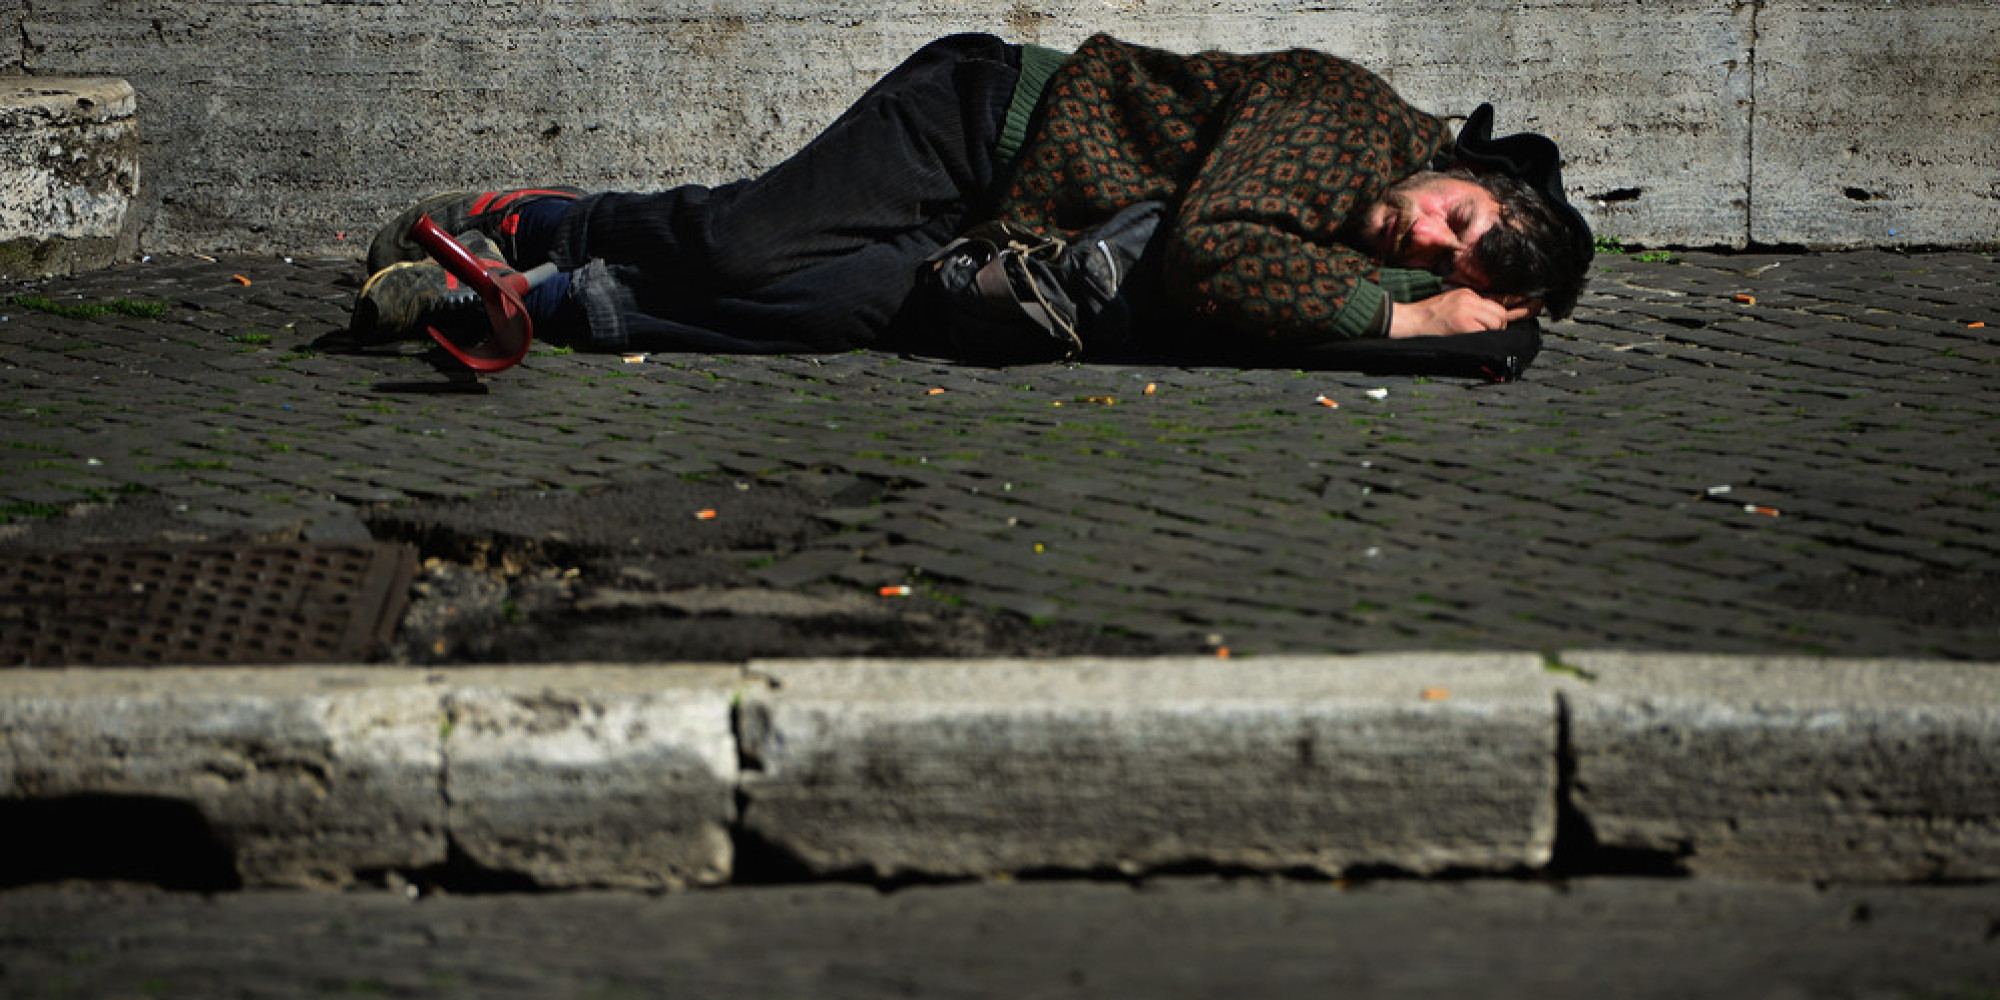 Homeless People Could Be Fined Up To 1000 For Sleeping Rough